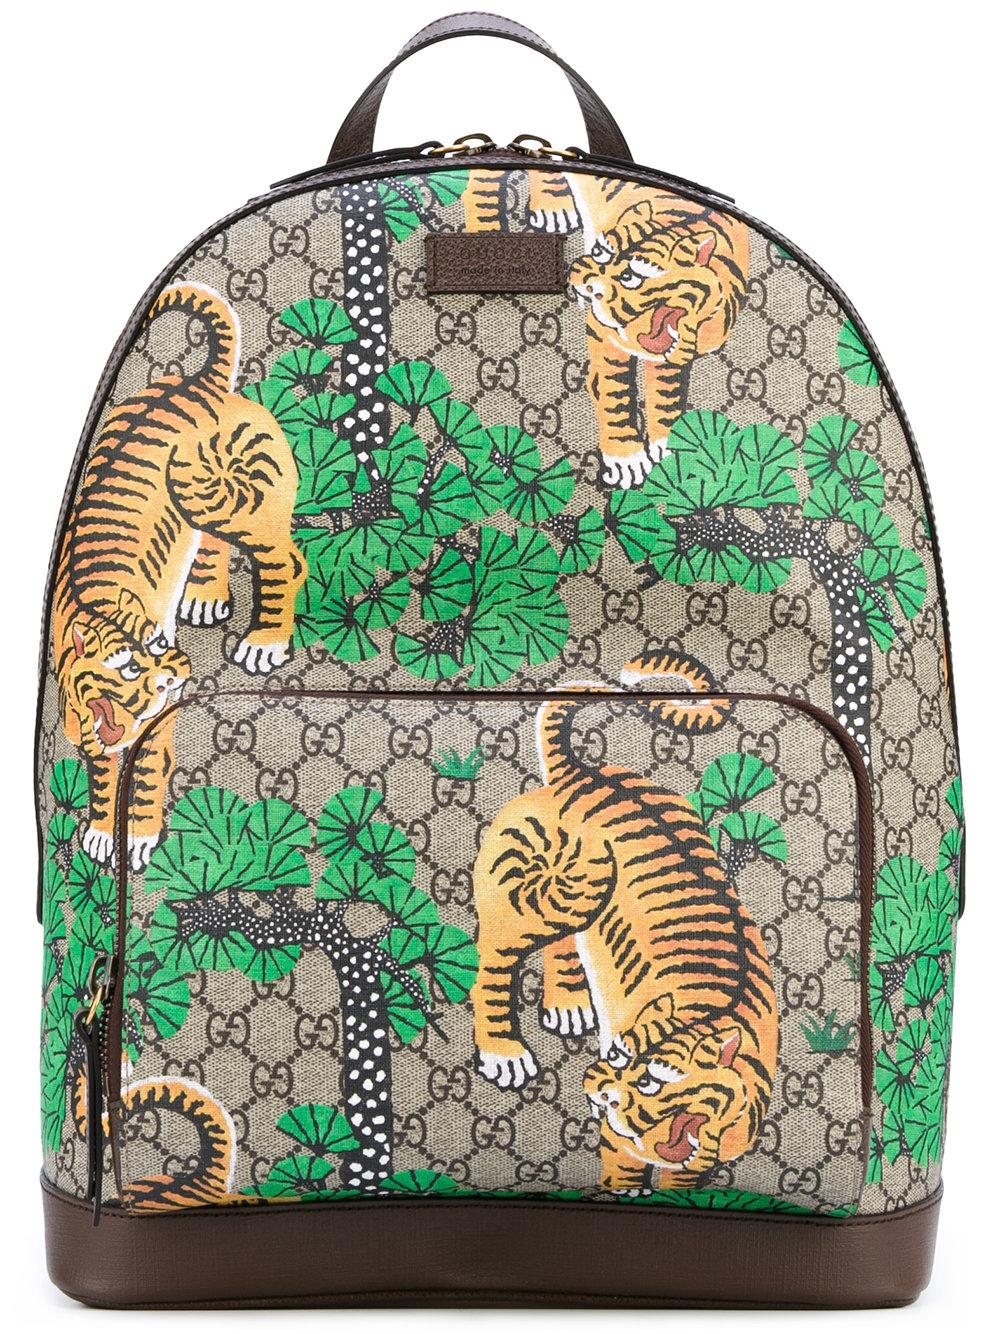 Gucci Bengal Backpack, Buy Now, Flash Sales, 50% OFF, acananortheast.com